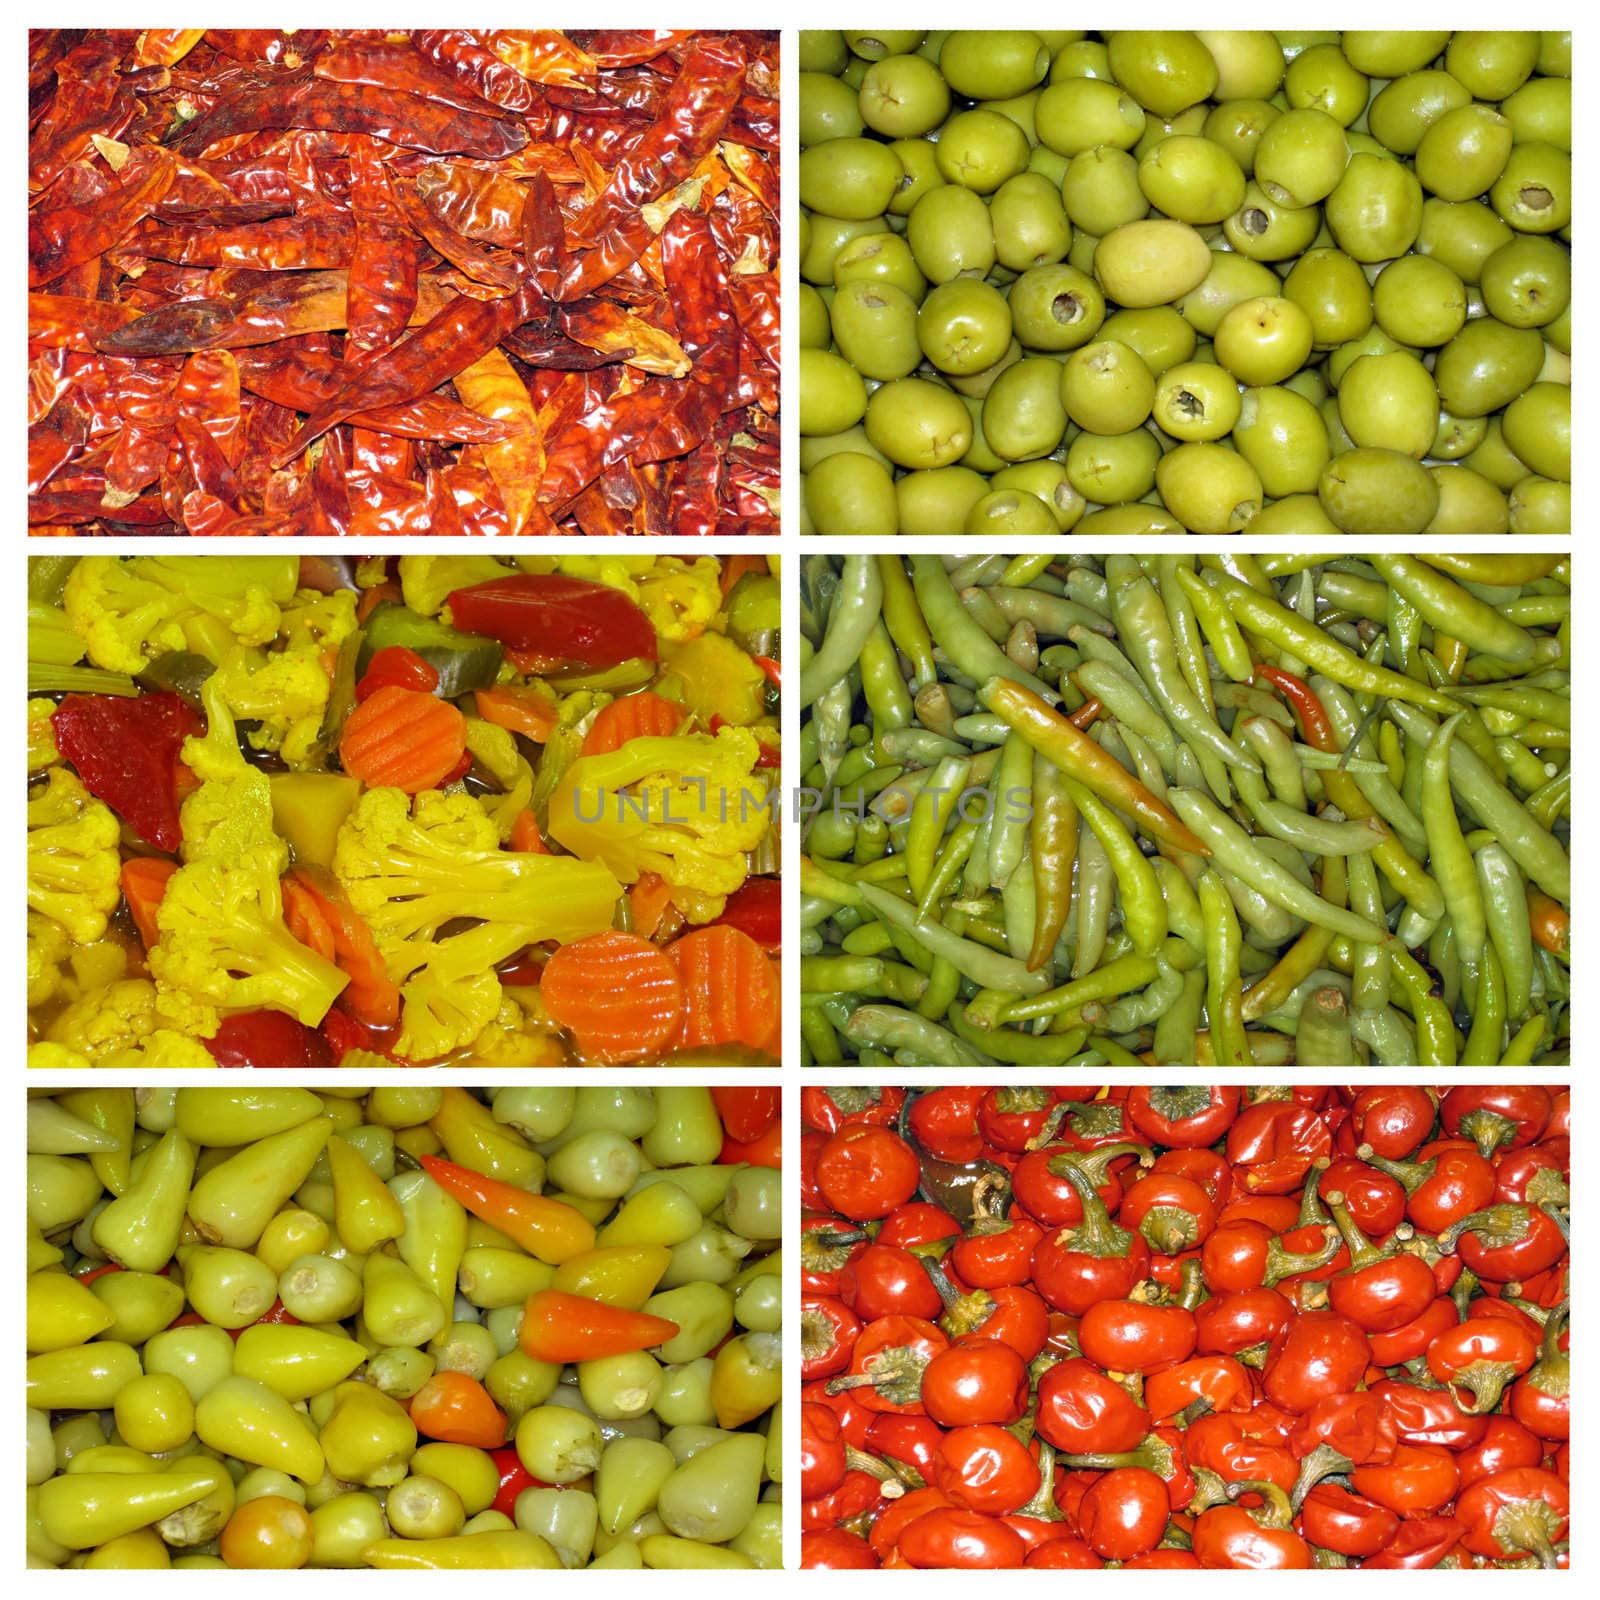 Collage of marinated vegetables by irisphoto4